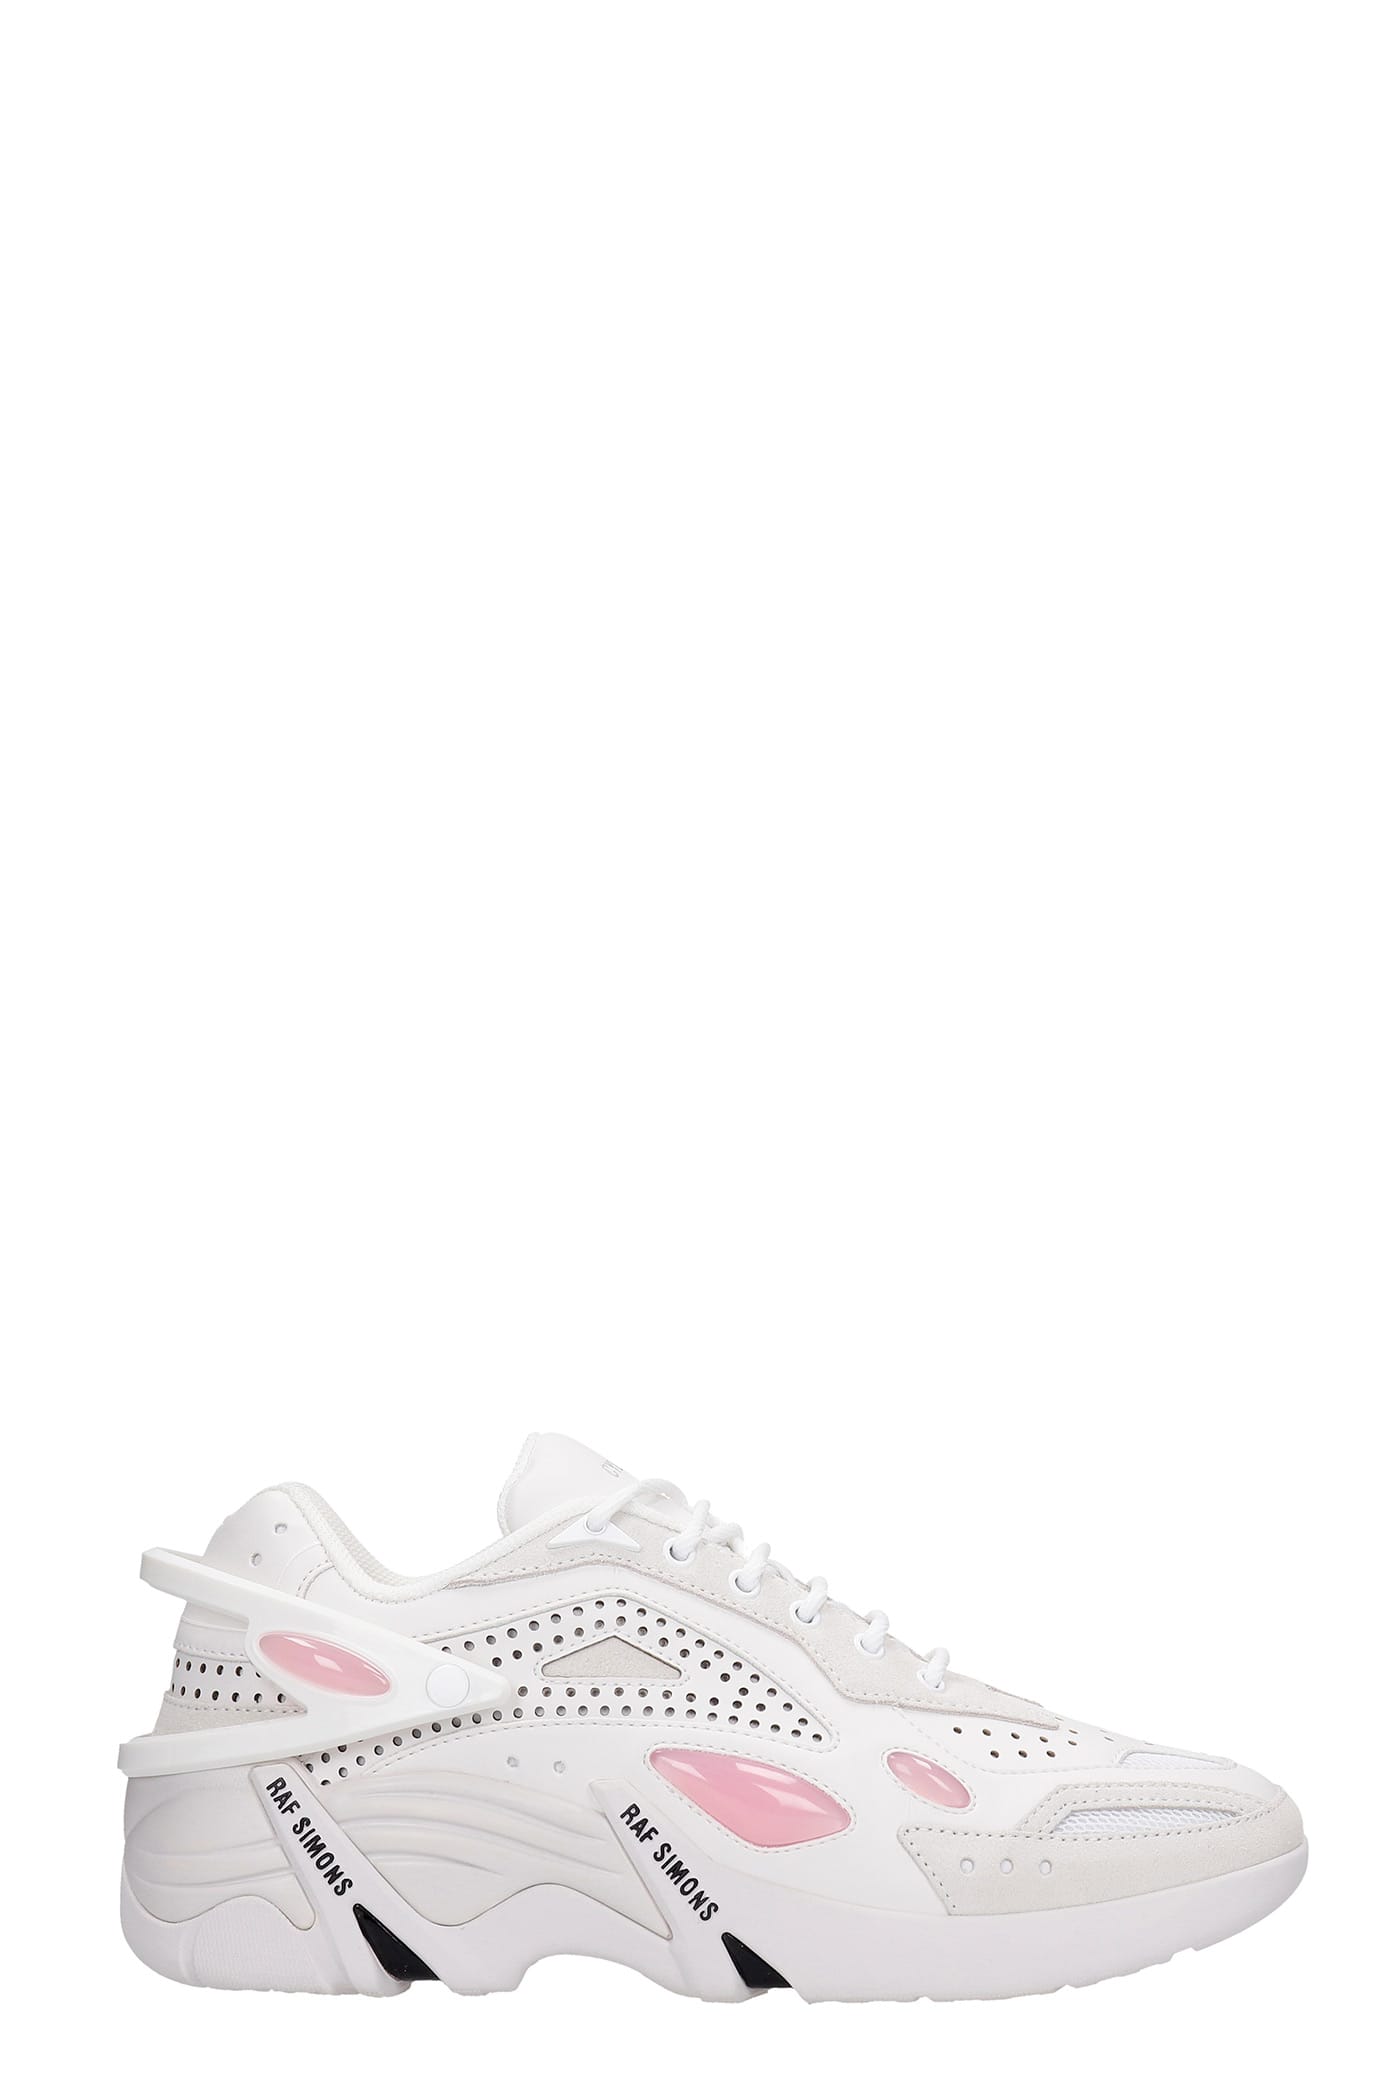 Raf Simons Cylon Sneakers In White Leather